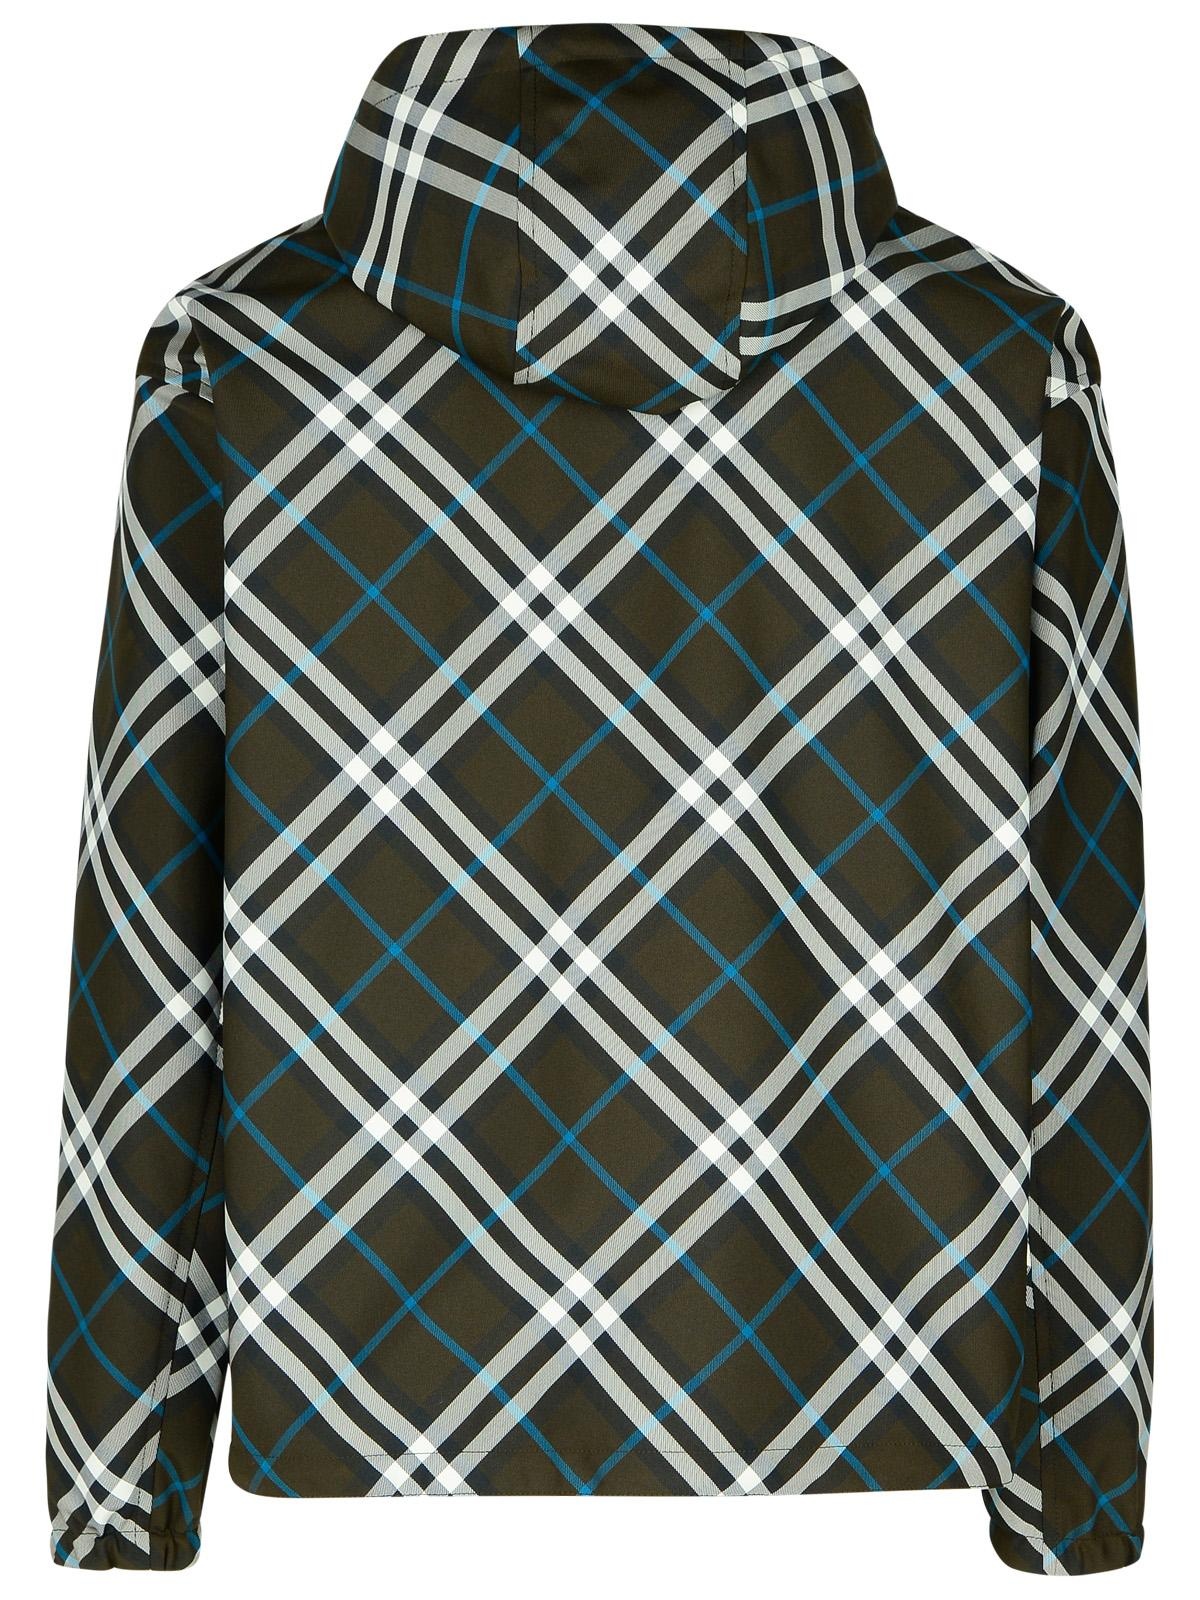 Burberry 'Check' Reversible Green Polyester Jacket Man - 3